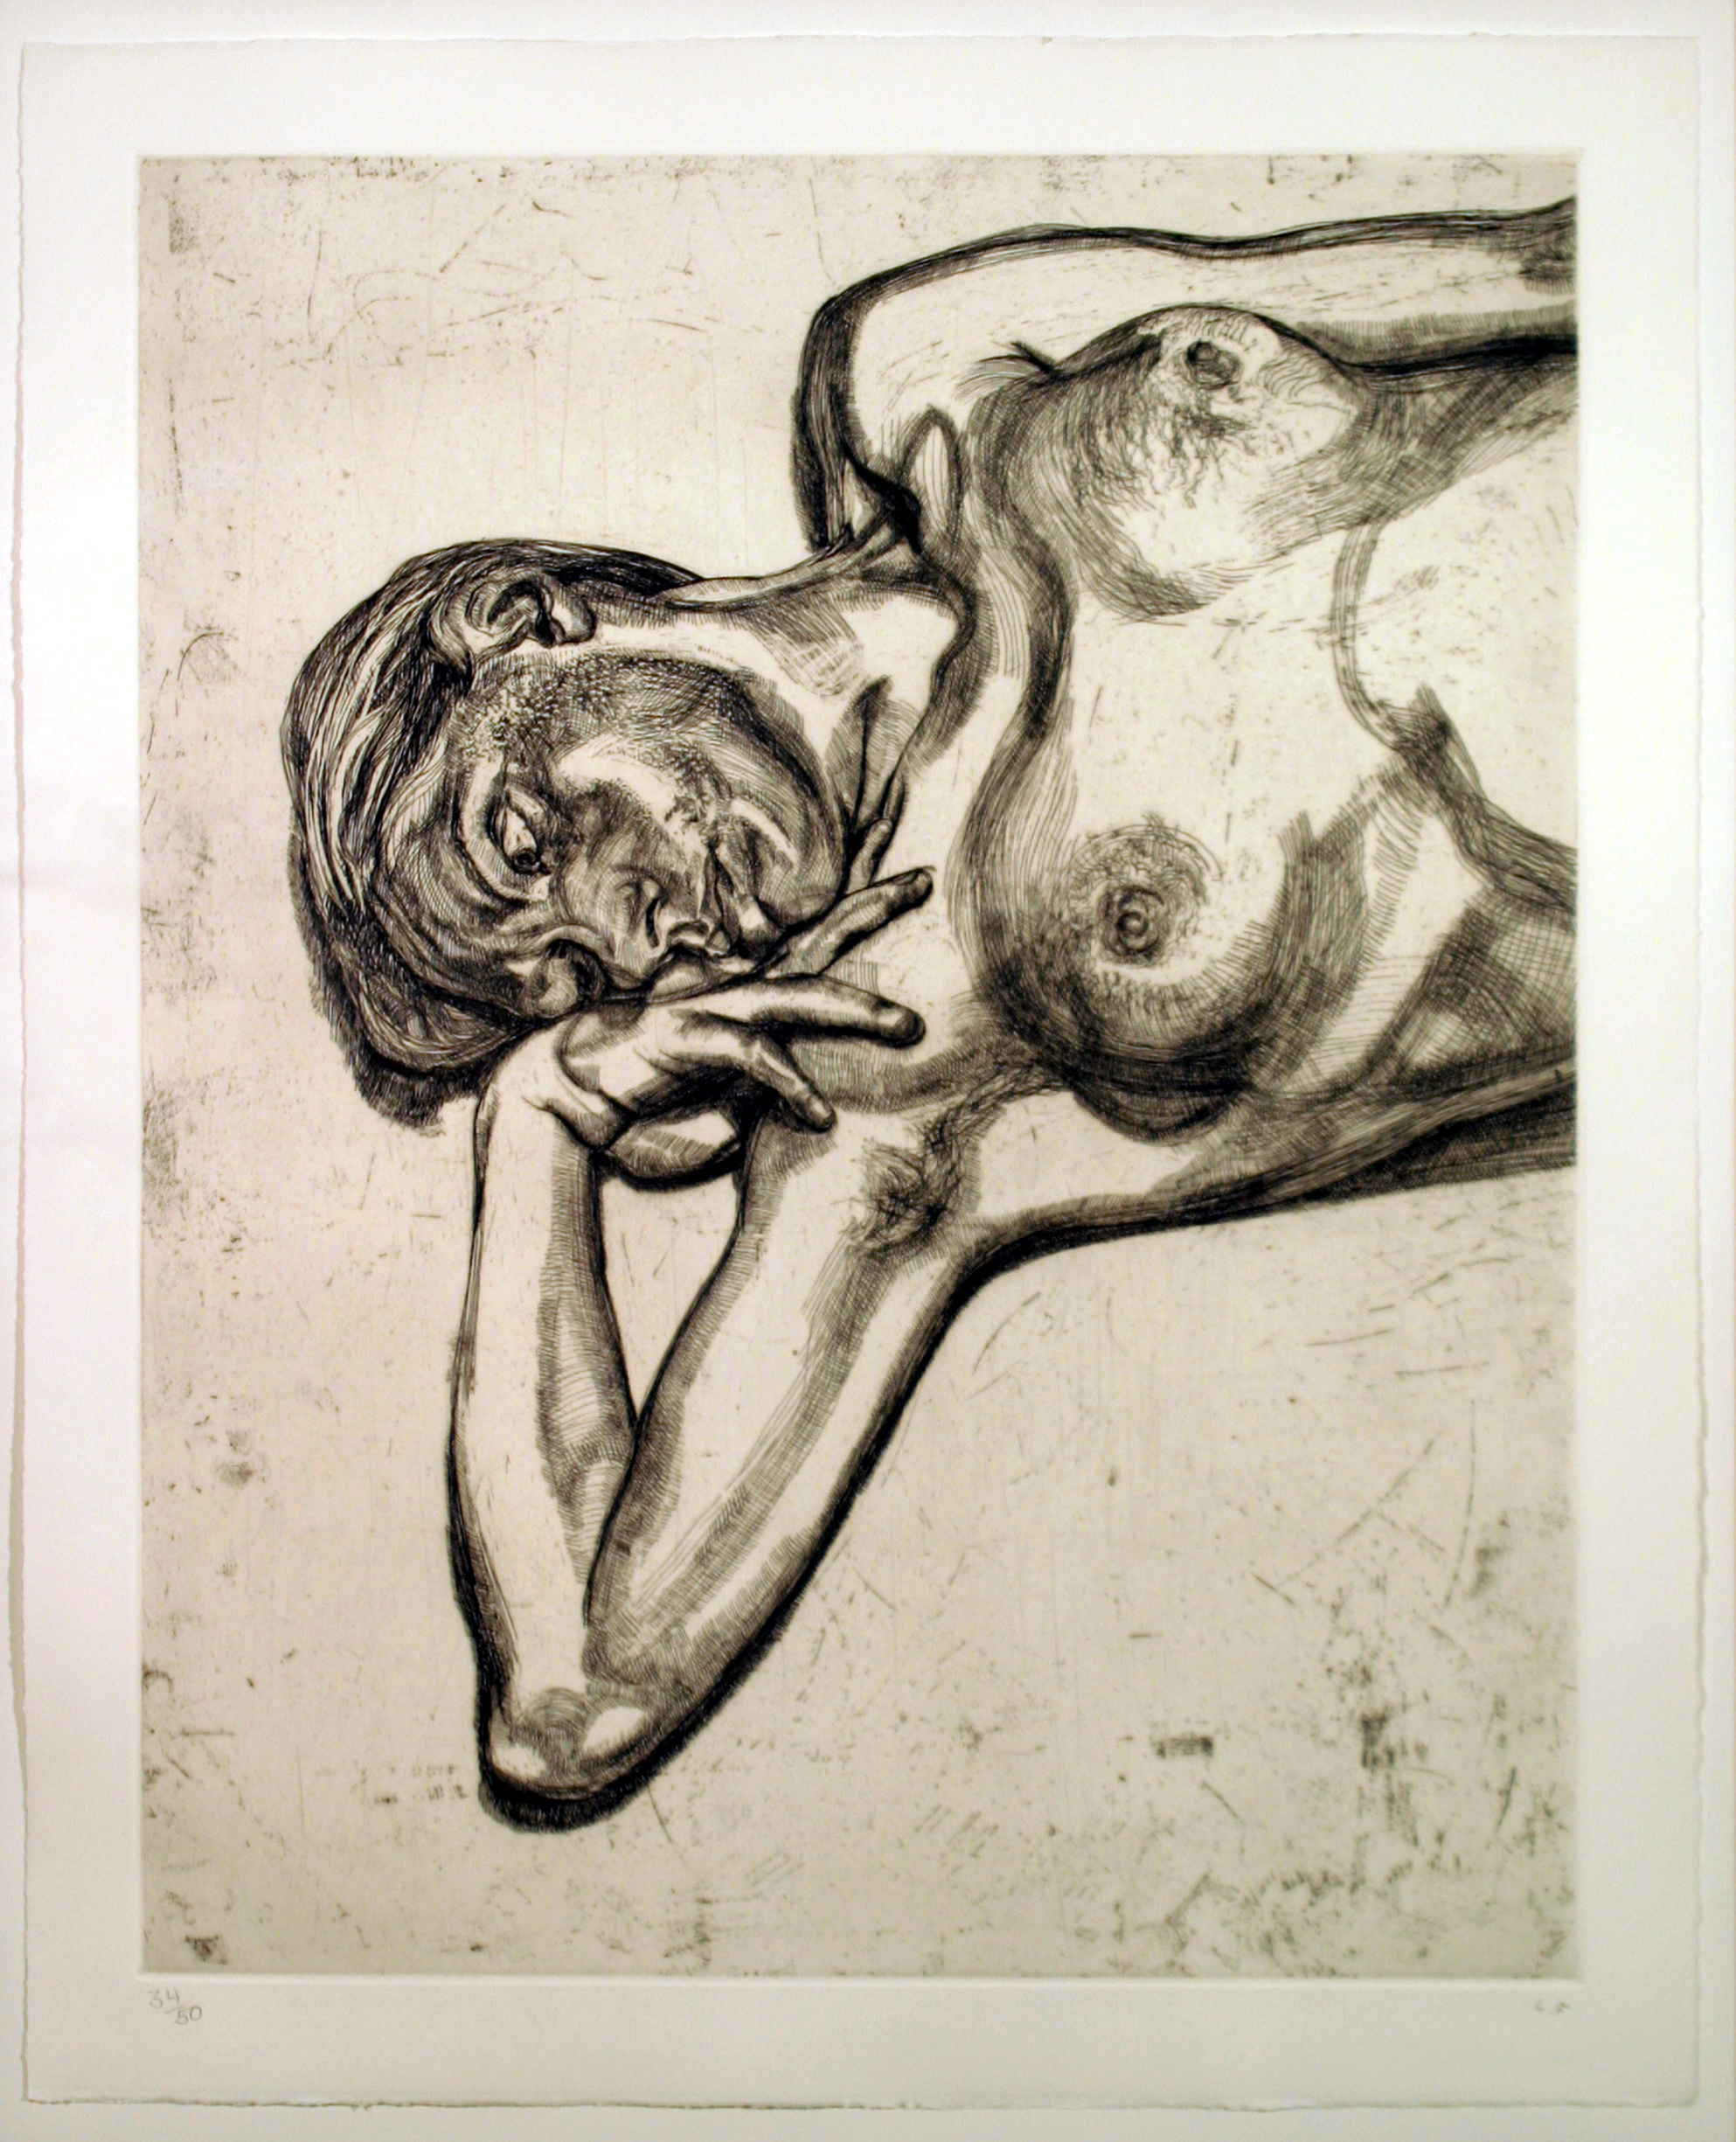 Lucian Freud, "Head and Shoulders of a Girl," 1990, Etching, 77 x 63 cm (30 5/16 x 24 13/16 in), UBS Art Collection © The Lucian Freud Archive. All Rights Reserved 2024 / Bridgeman Images 